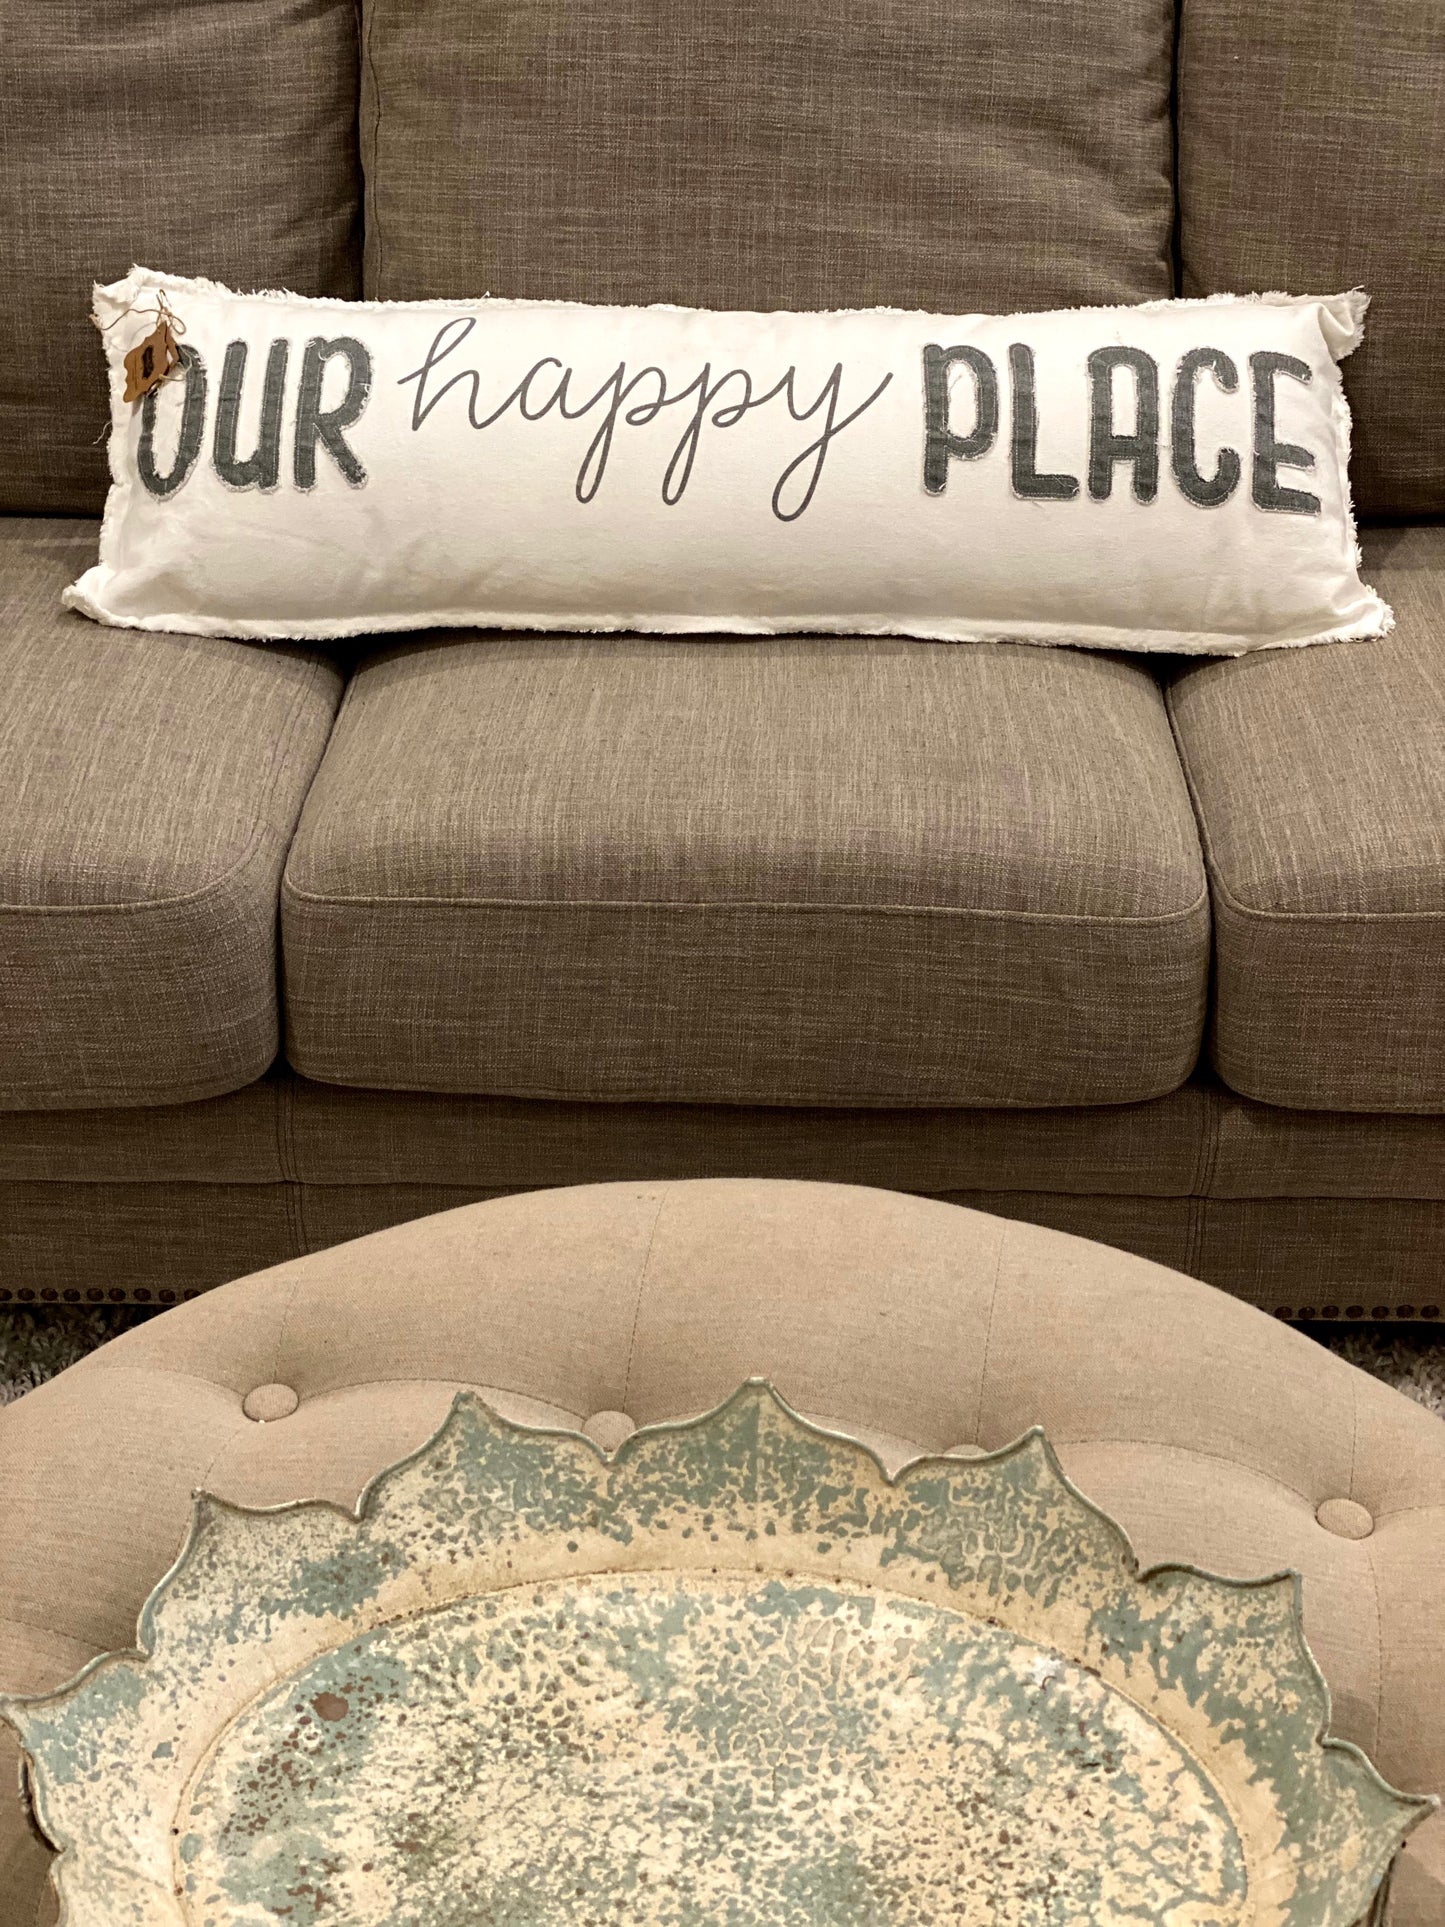 Our Happy Place Long Pillow